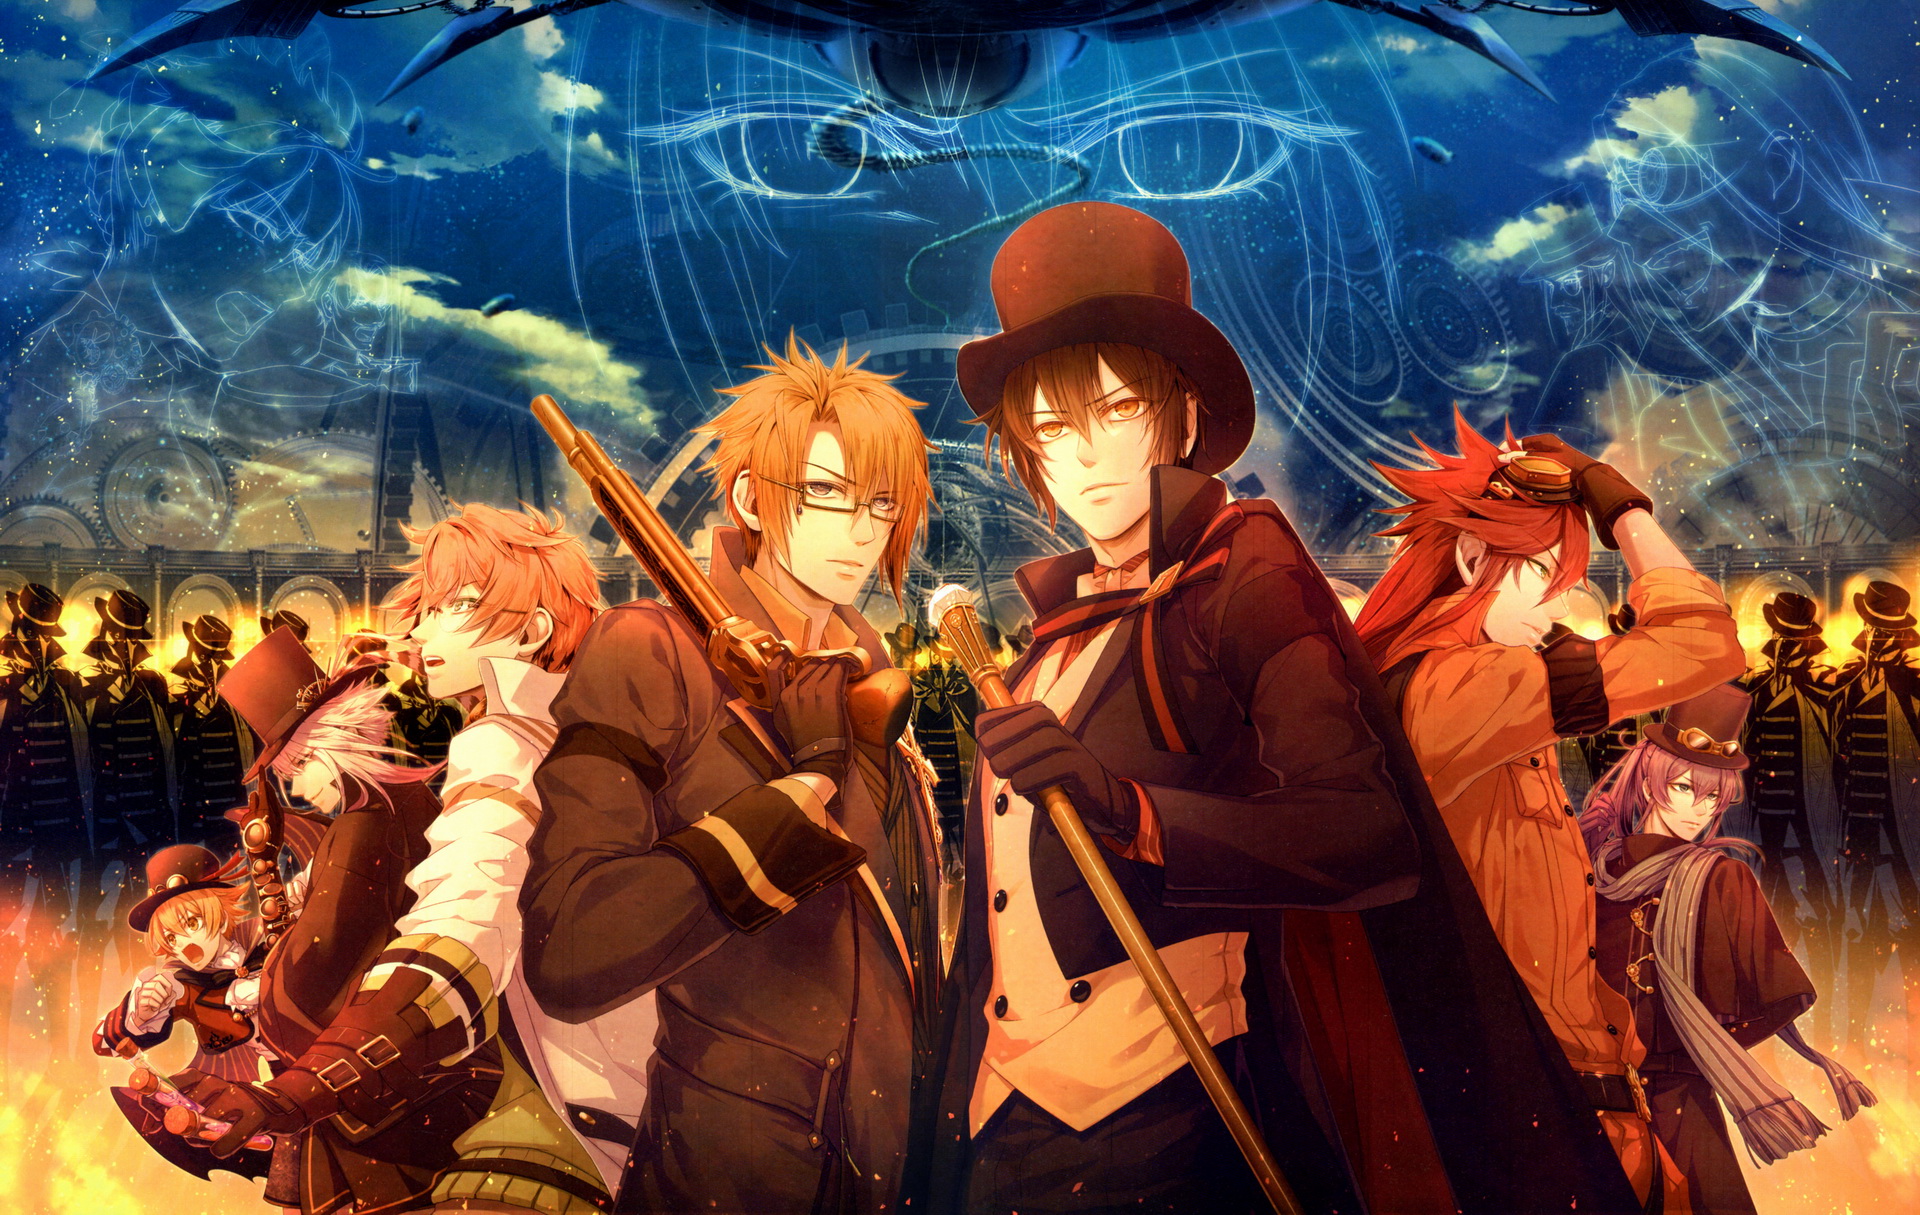 Video Game Code: Realize HD Wallpaper | Background Image